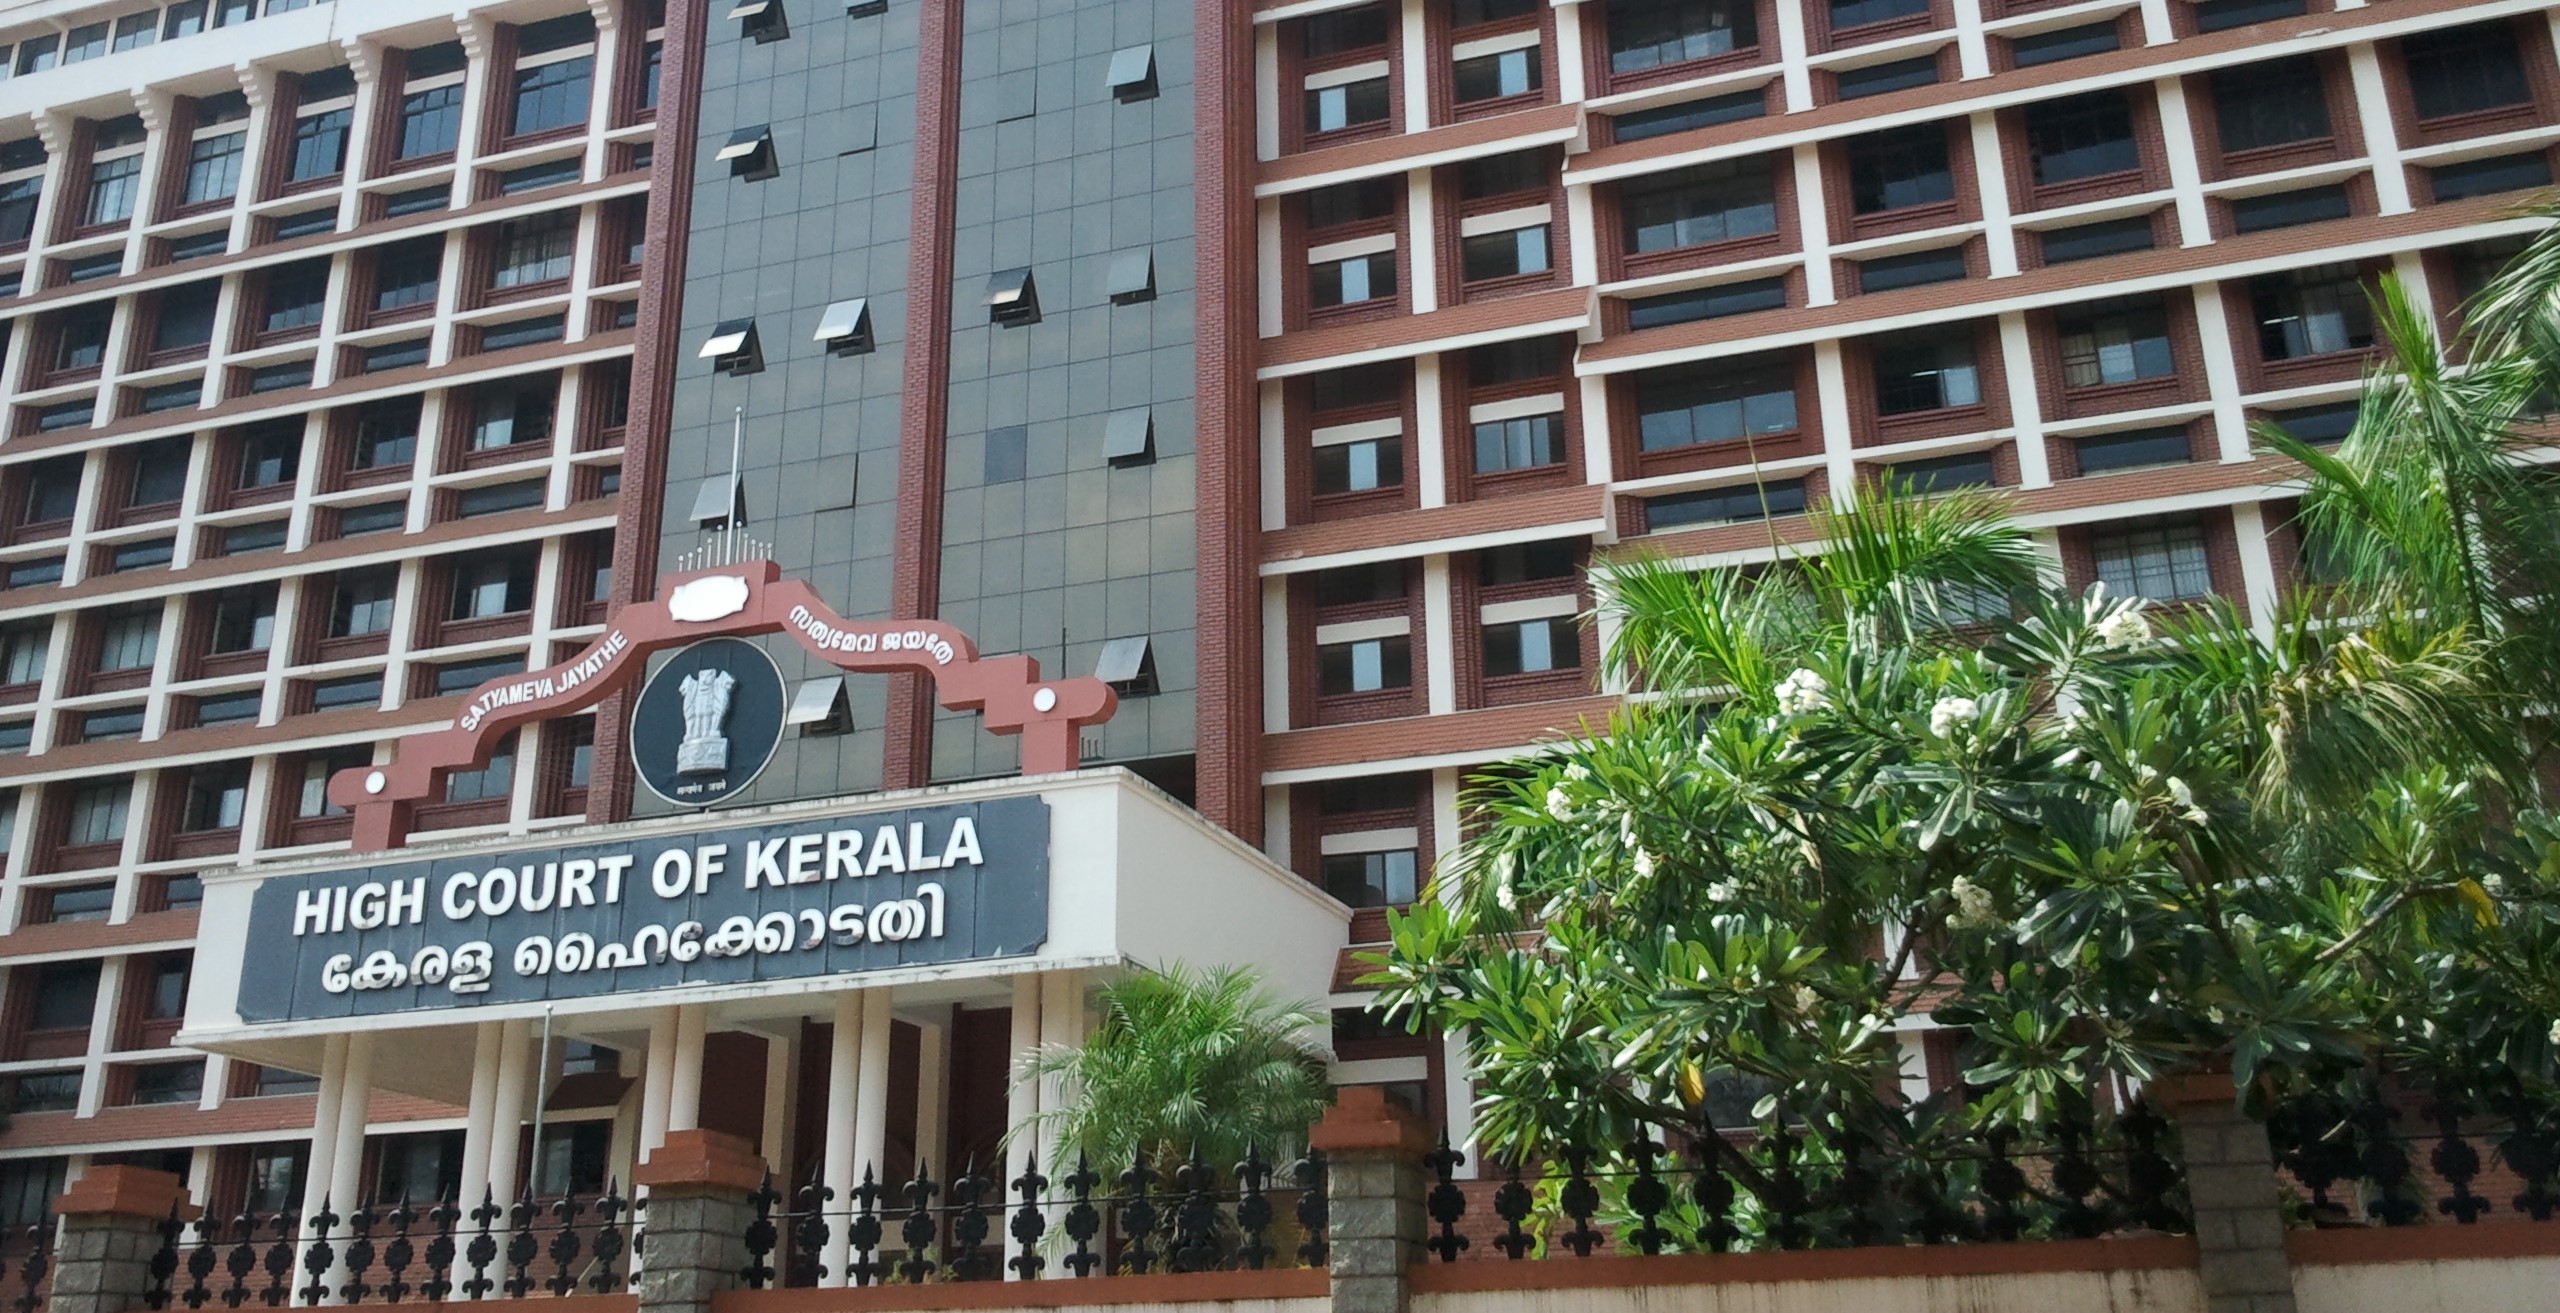 Woman pink police officer accusing father,daughter of being thieves indicates khaki ego,arrogance: Kerala HC